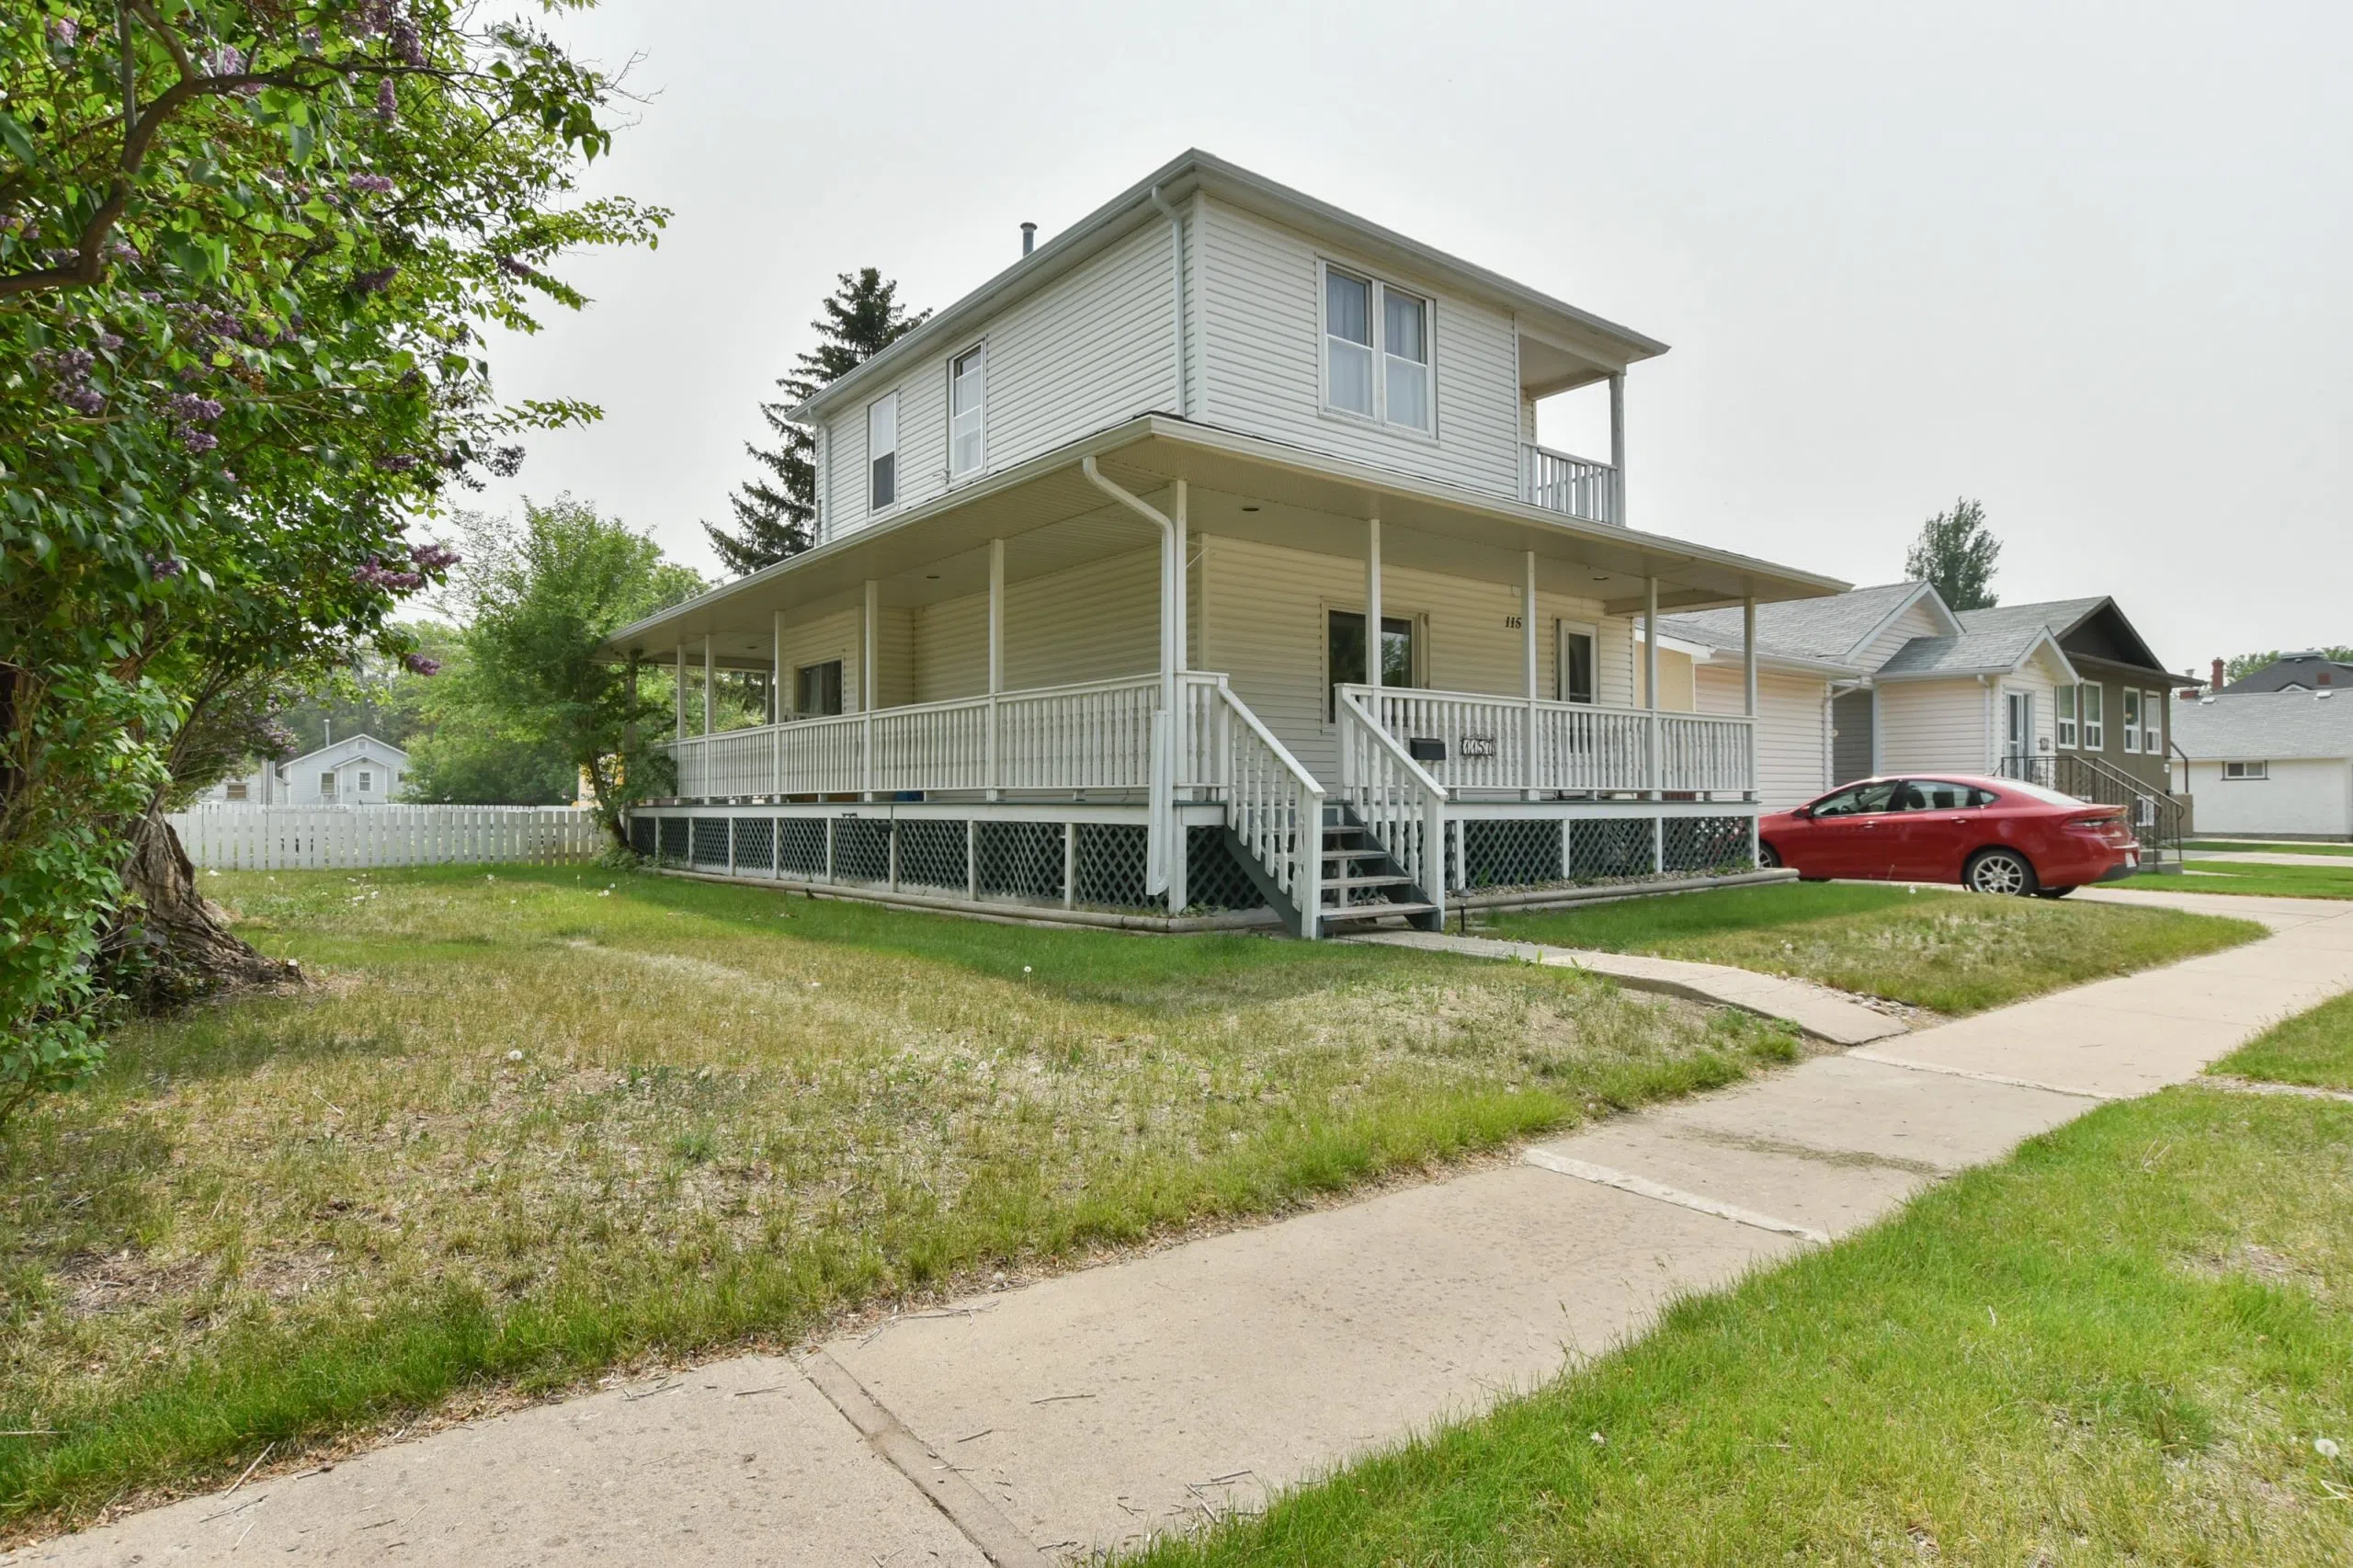 1157 Yuill St SE, Medicine Hat | CHAT News Today 26 Feet Is How Many Yards